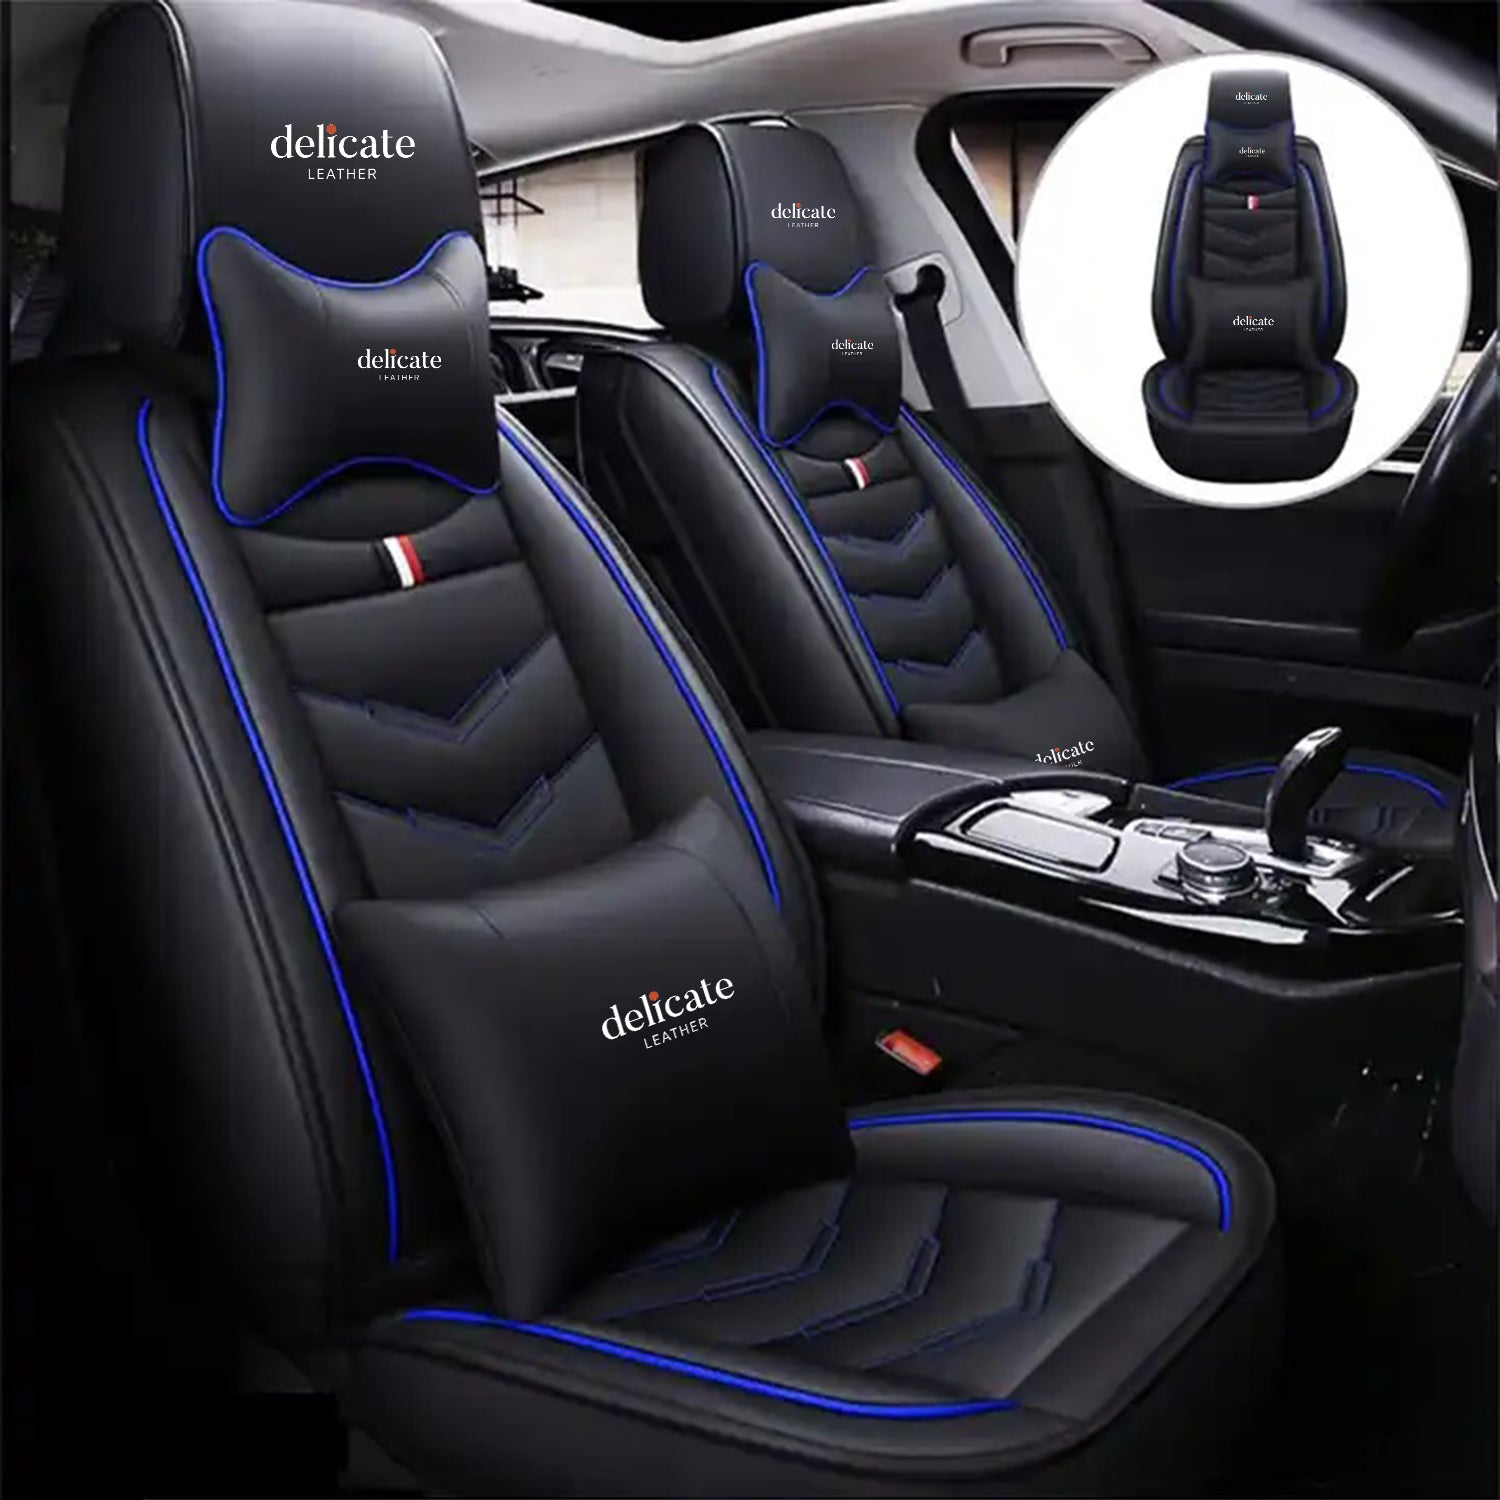 Delicate Leather Car Seat Cover Hot Selling Luxury Durable Comfortable Full Leather Car Seat Cover For All Kinds Of Car Seat Cover - Delicate Leather